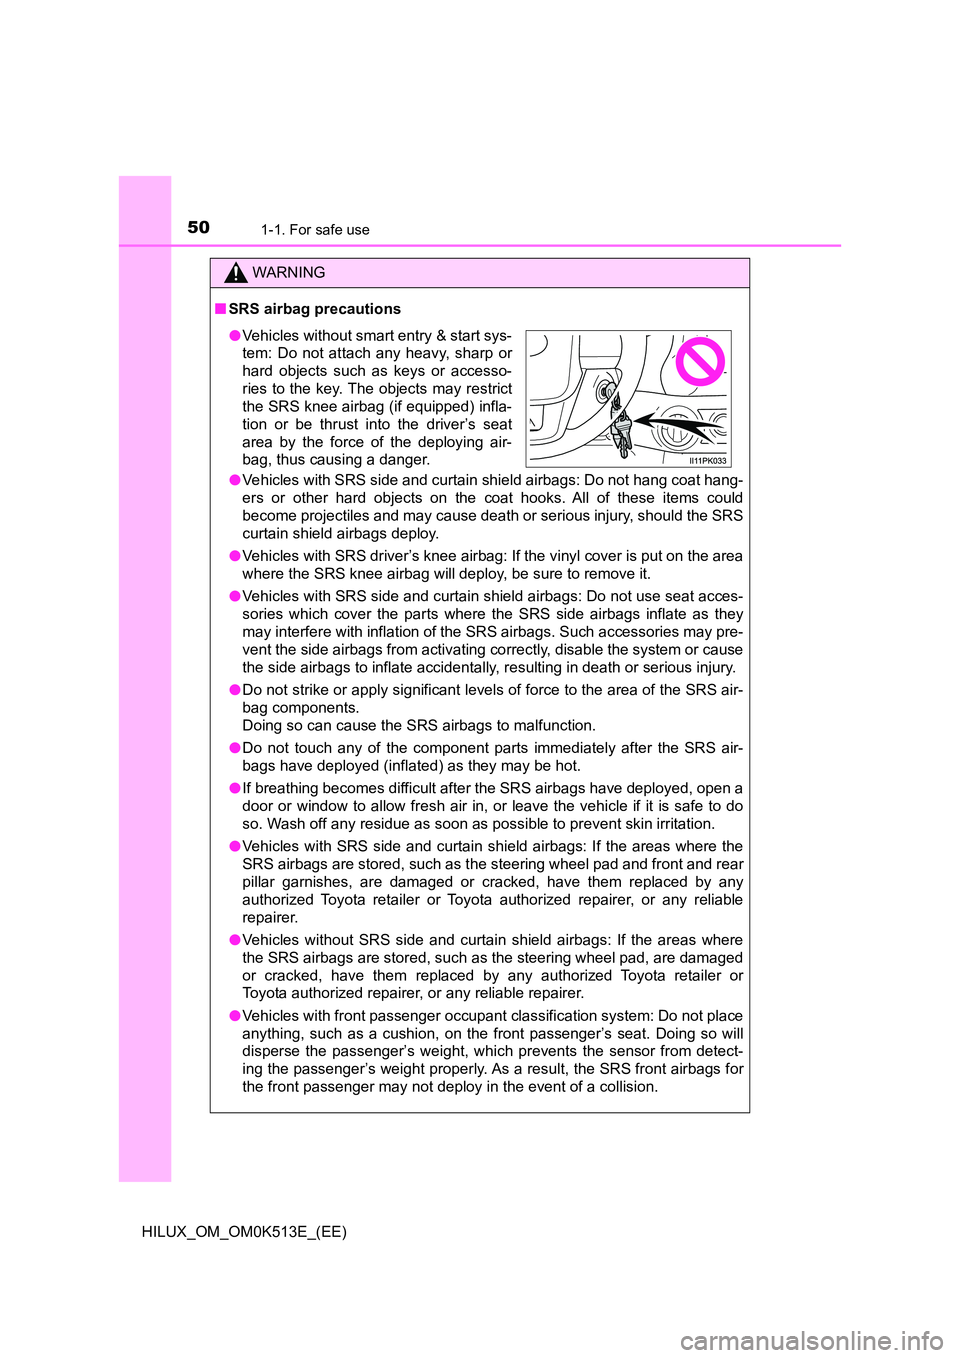 TOYOTA HILUX 2021  Owners Manual (in English) 501-1. For safe use
HILUX_OM_OM0K513E_(EE)
WARNING
�QSRS airbag precautions 
�O Vehicles with SRS side and curtain shield airbags: Do not hang coat hang- 
ers or other hard objects on the coat hooks. 